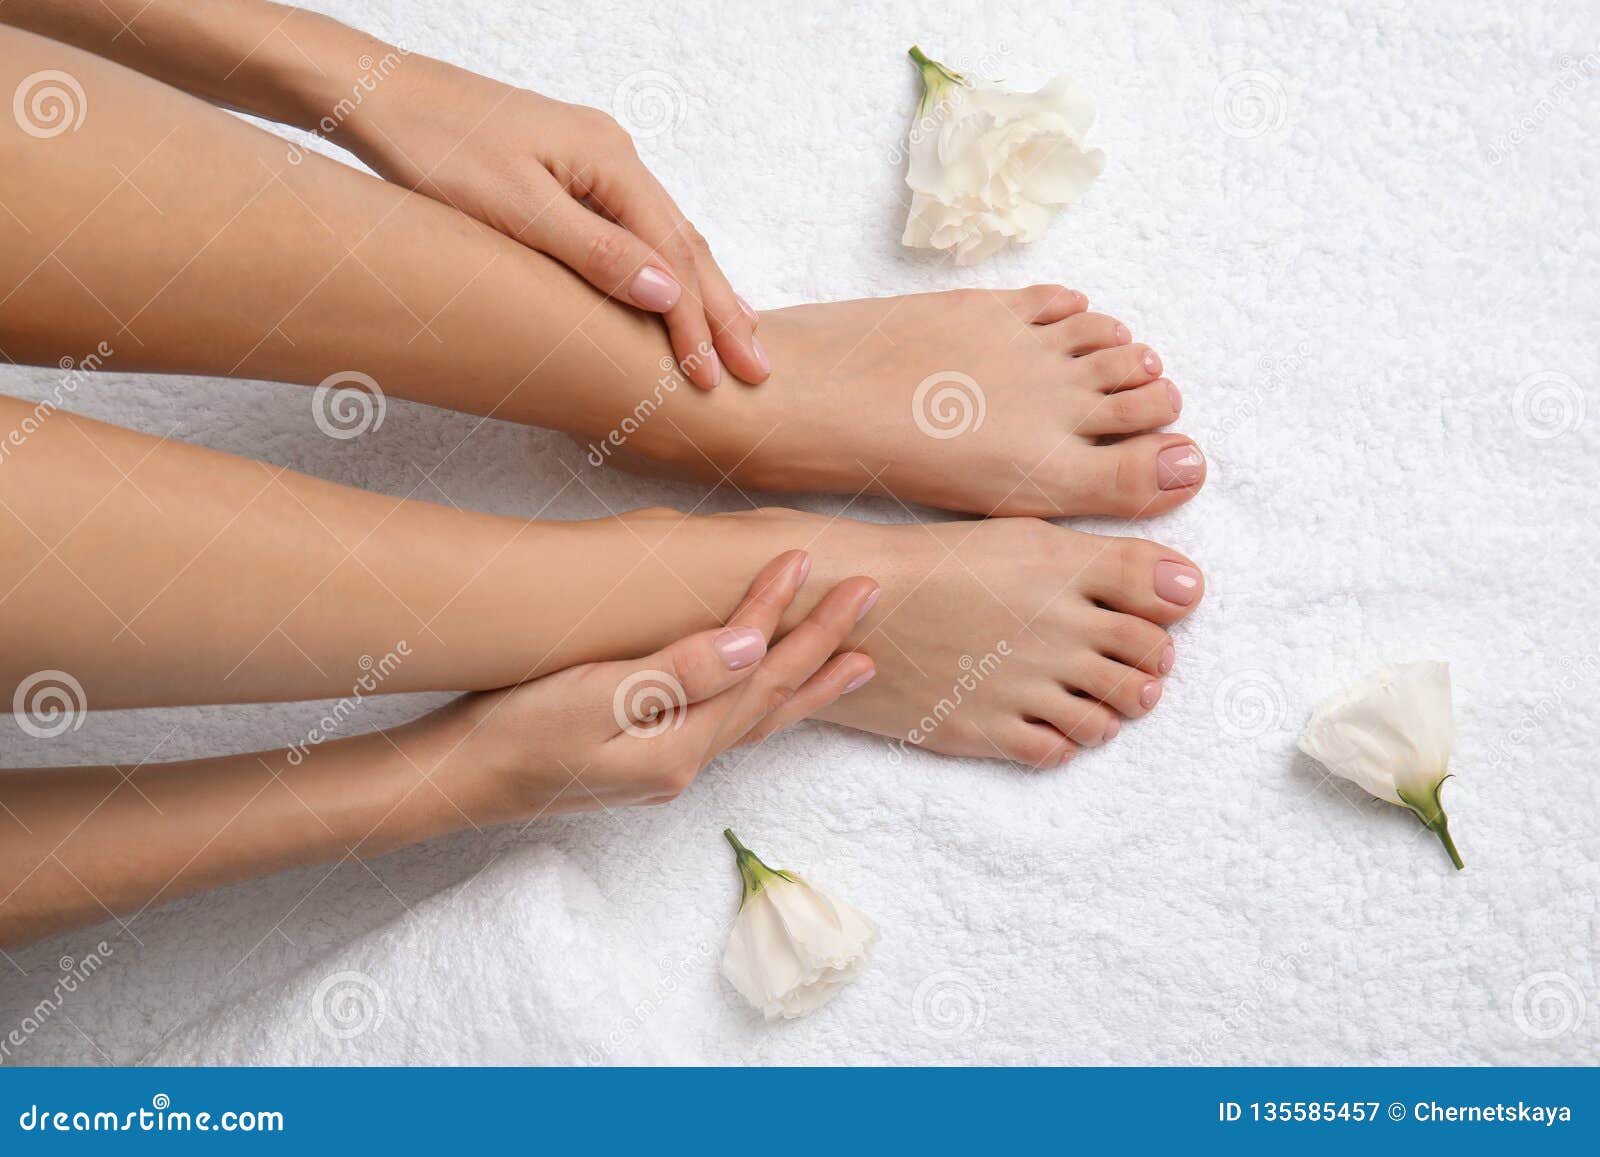 Woman Touching Her Smooth Feet On White Towel Top View Stock Image